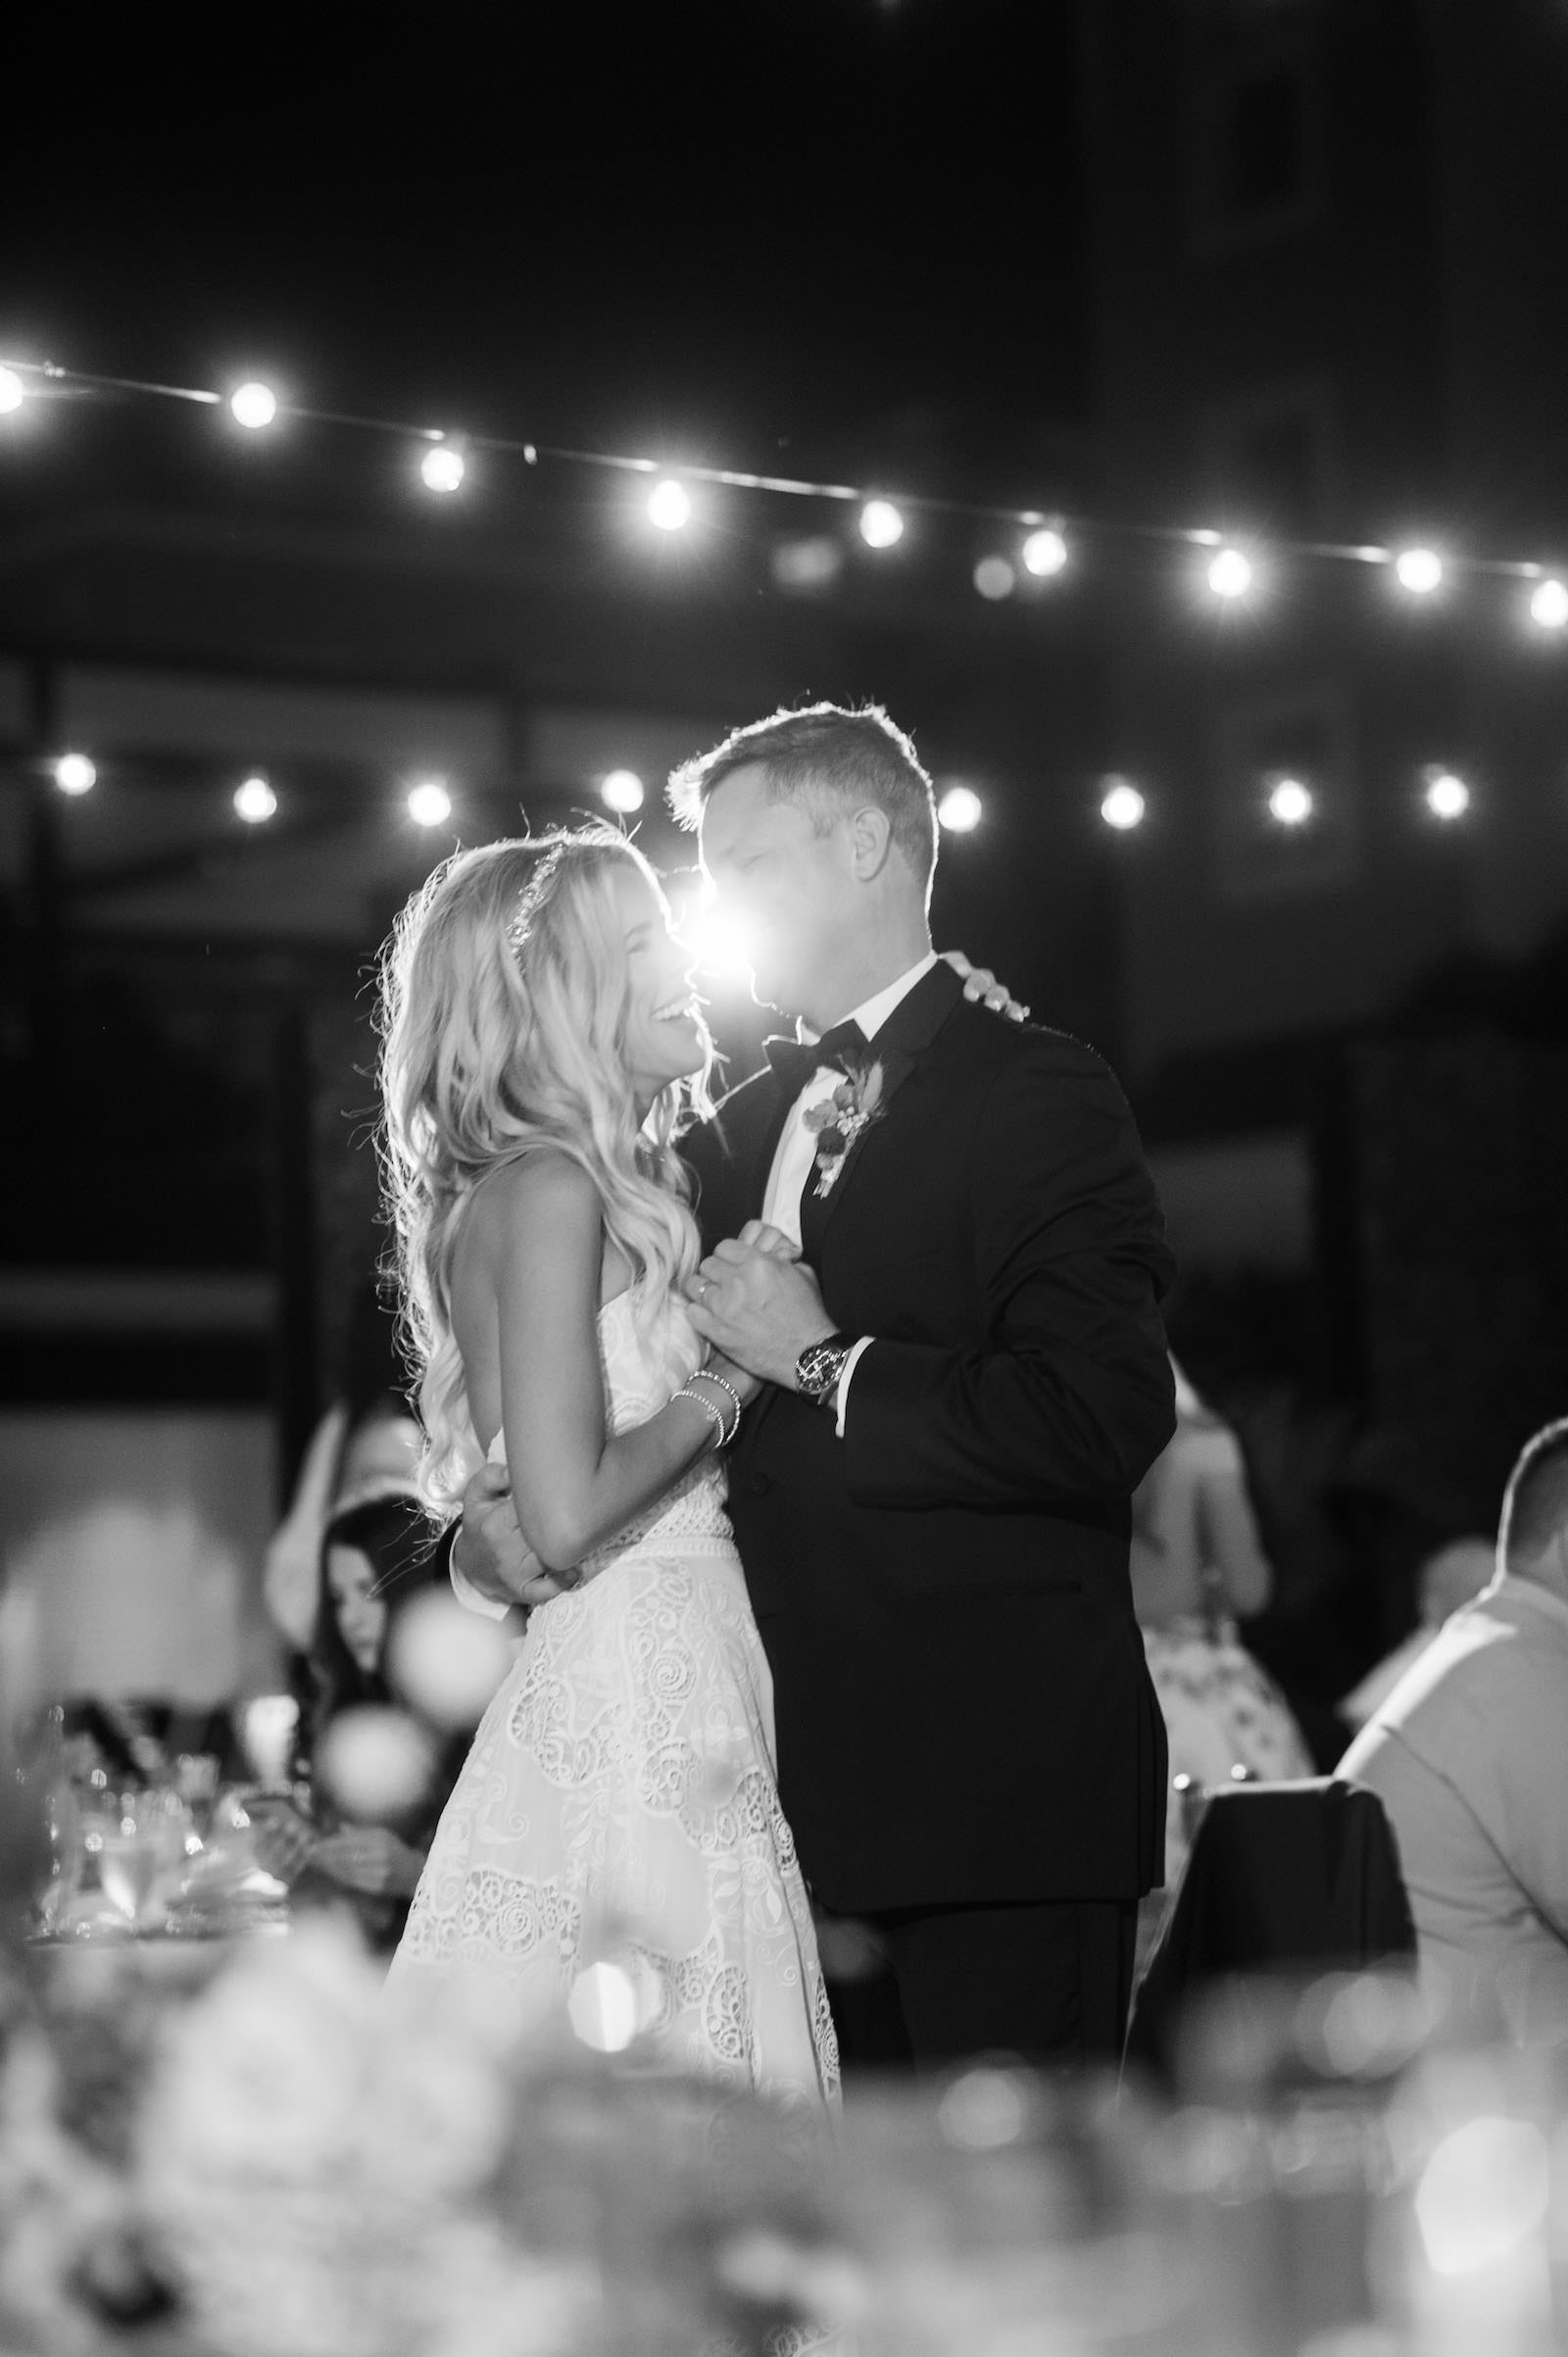 Black and White Portrait of Bride and Groom First Dance During Wedding Reception | Tampa Bay Wedding DJ Grant Hemond and Associates